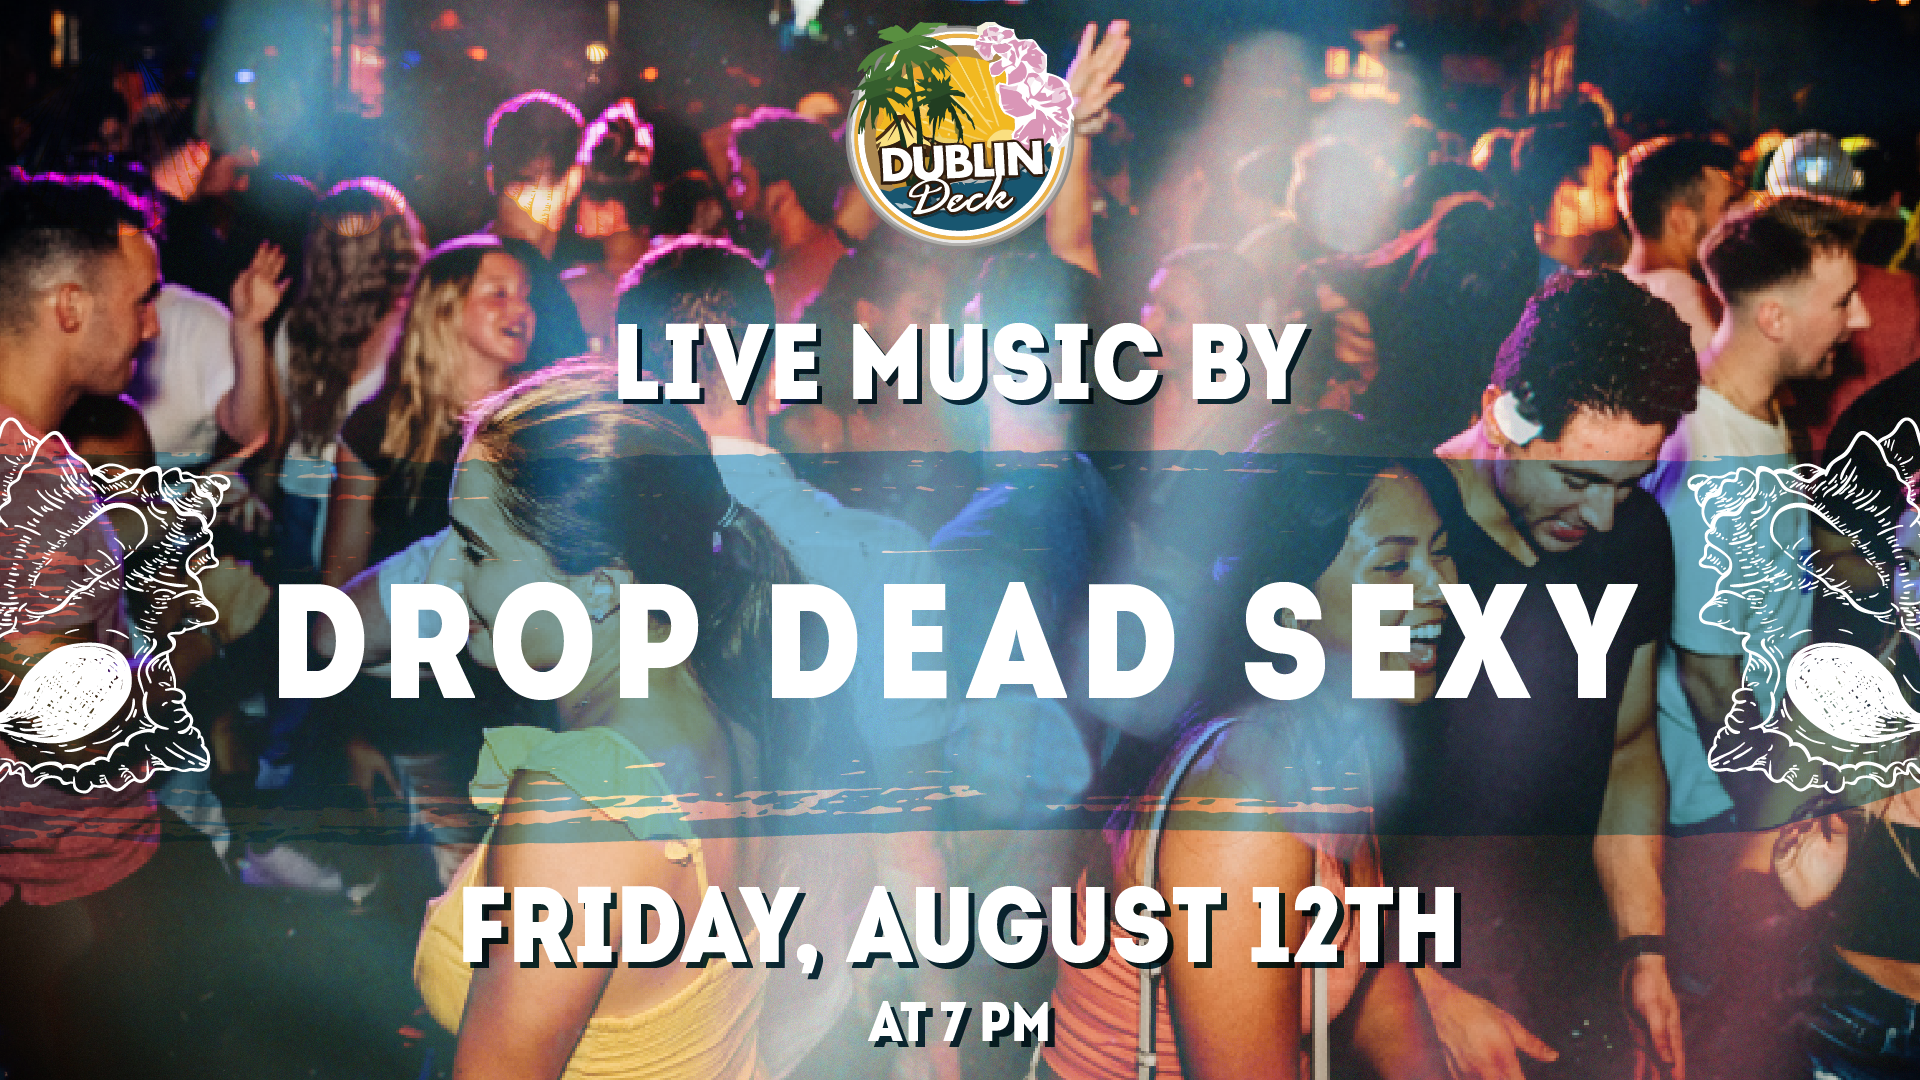 Kick off the weekend with Drop Dead Sexy hittin' the stage! Music begins at 7PM